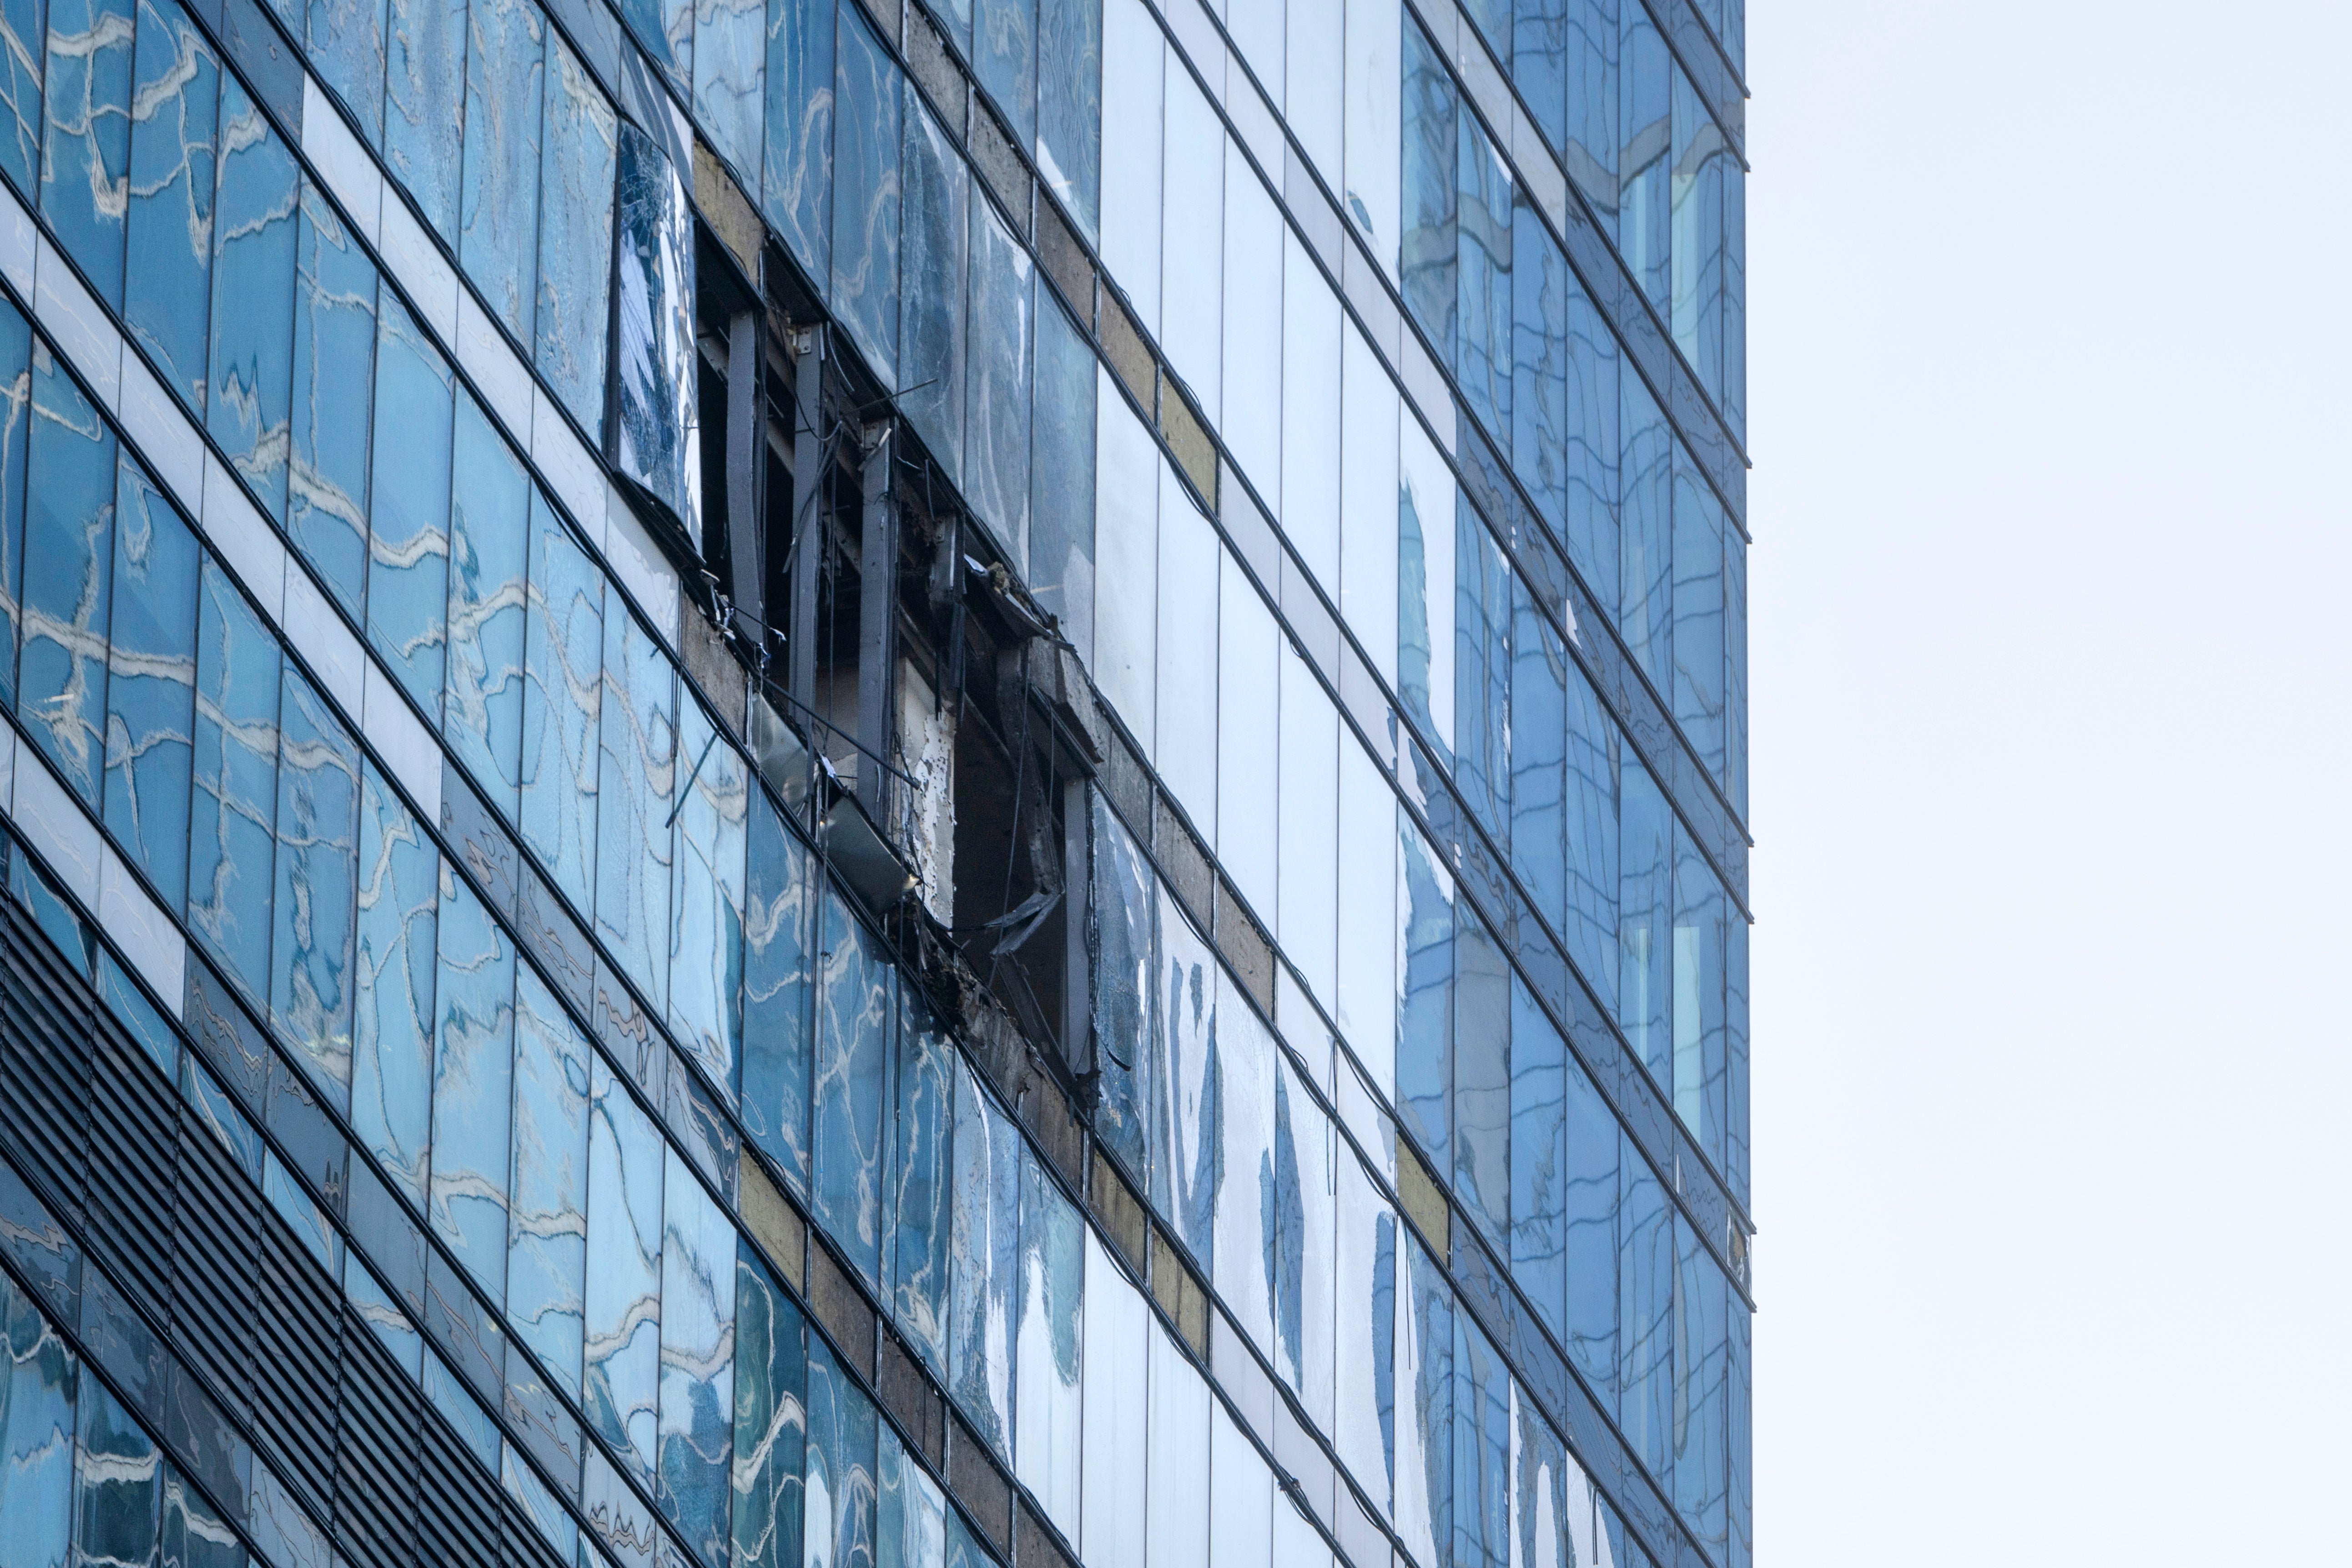 Several panes of glass were damages or destroyed